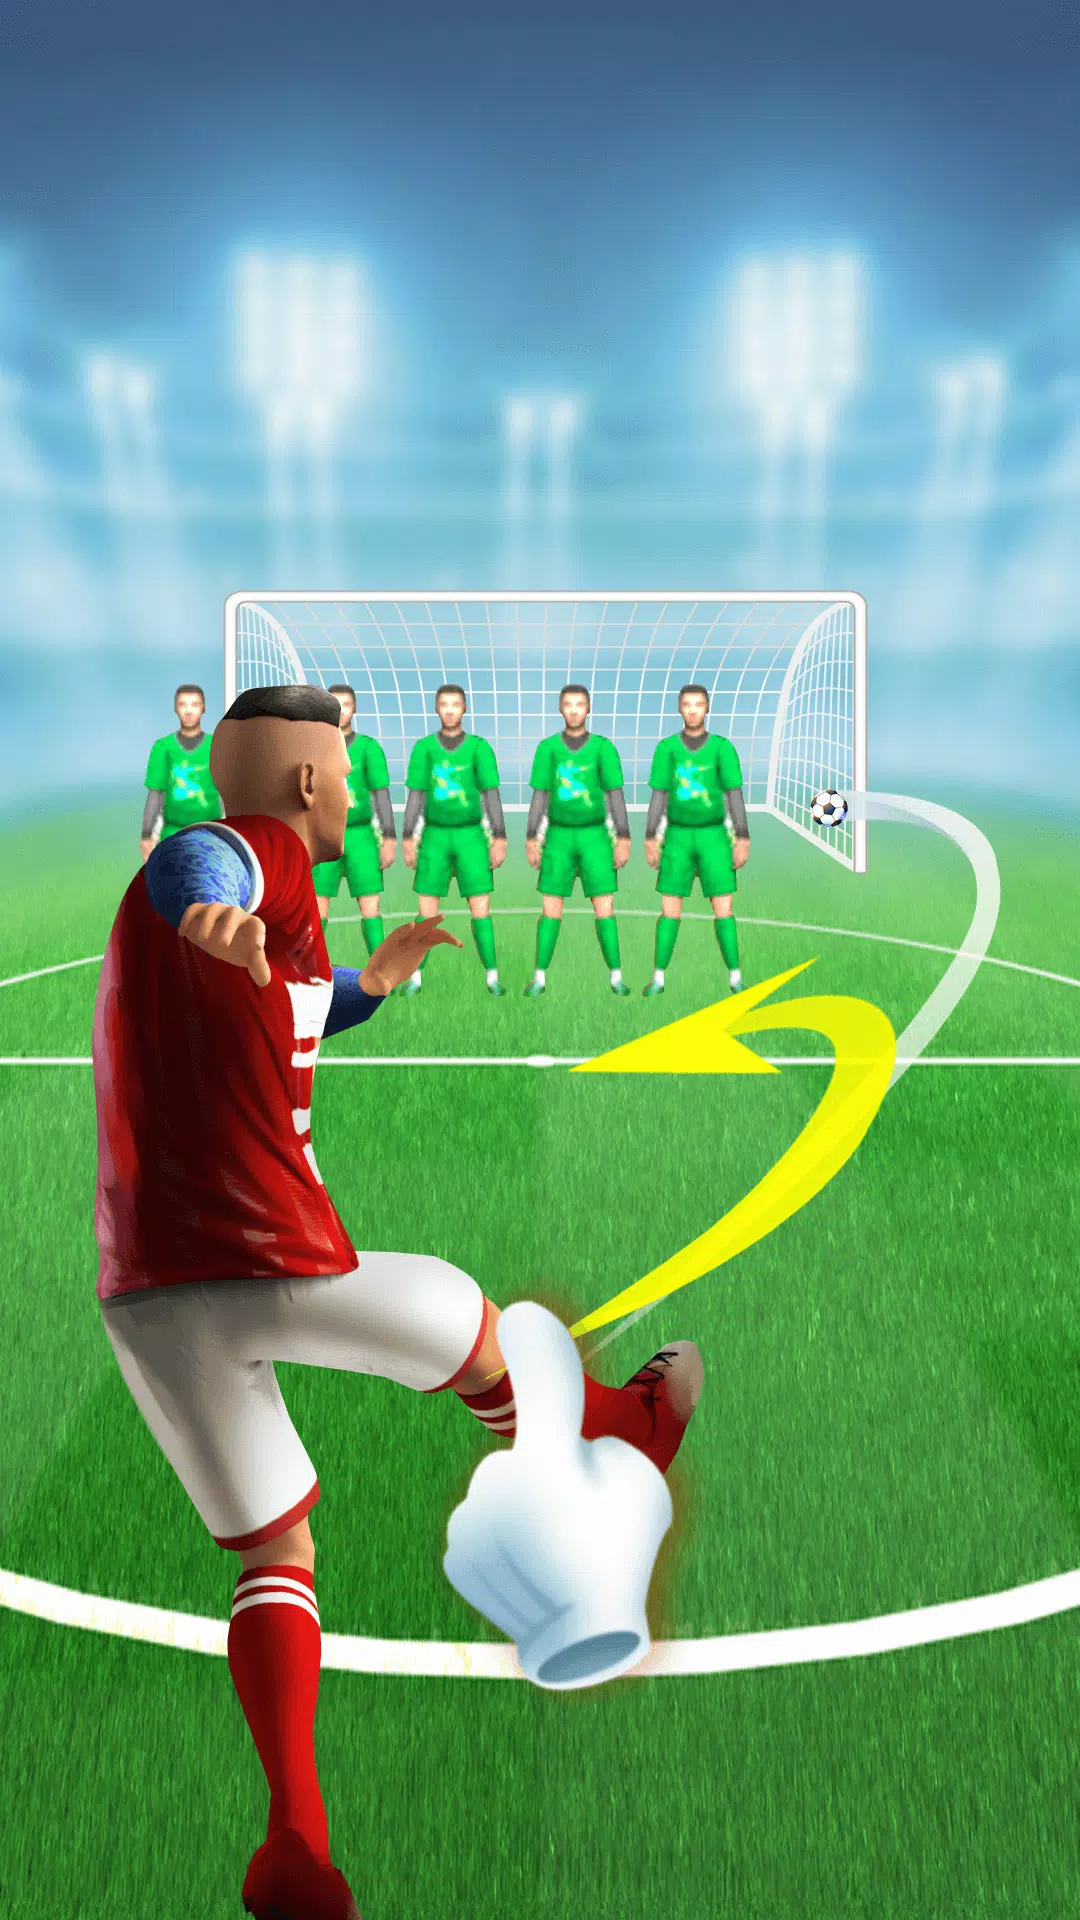 Penalty Shooters Footy 1.3 Free Download